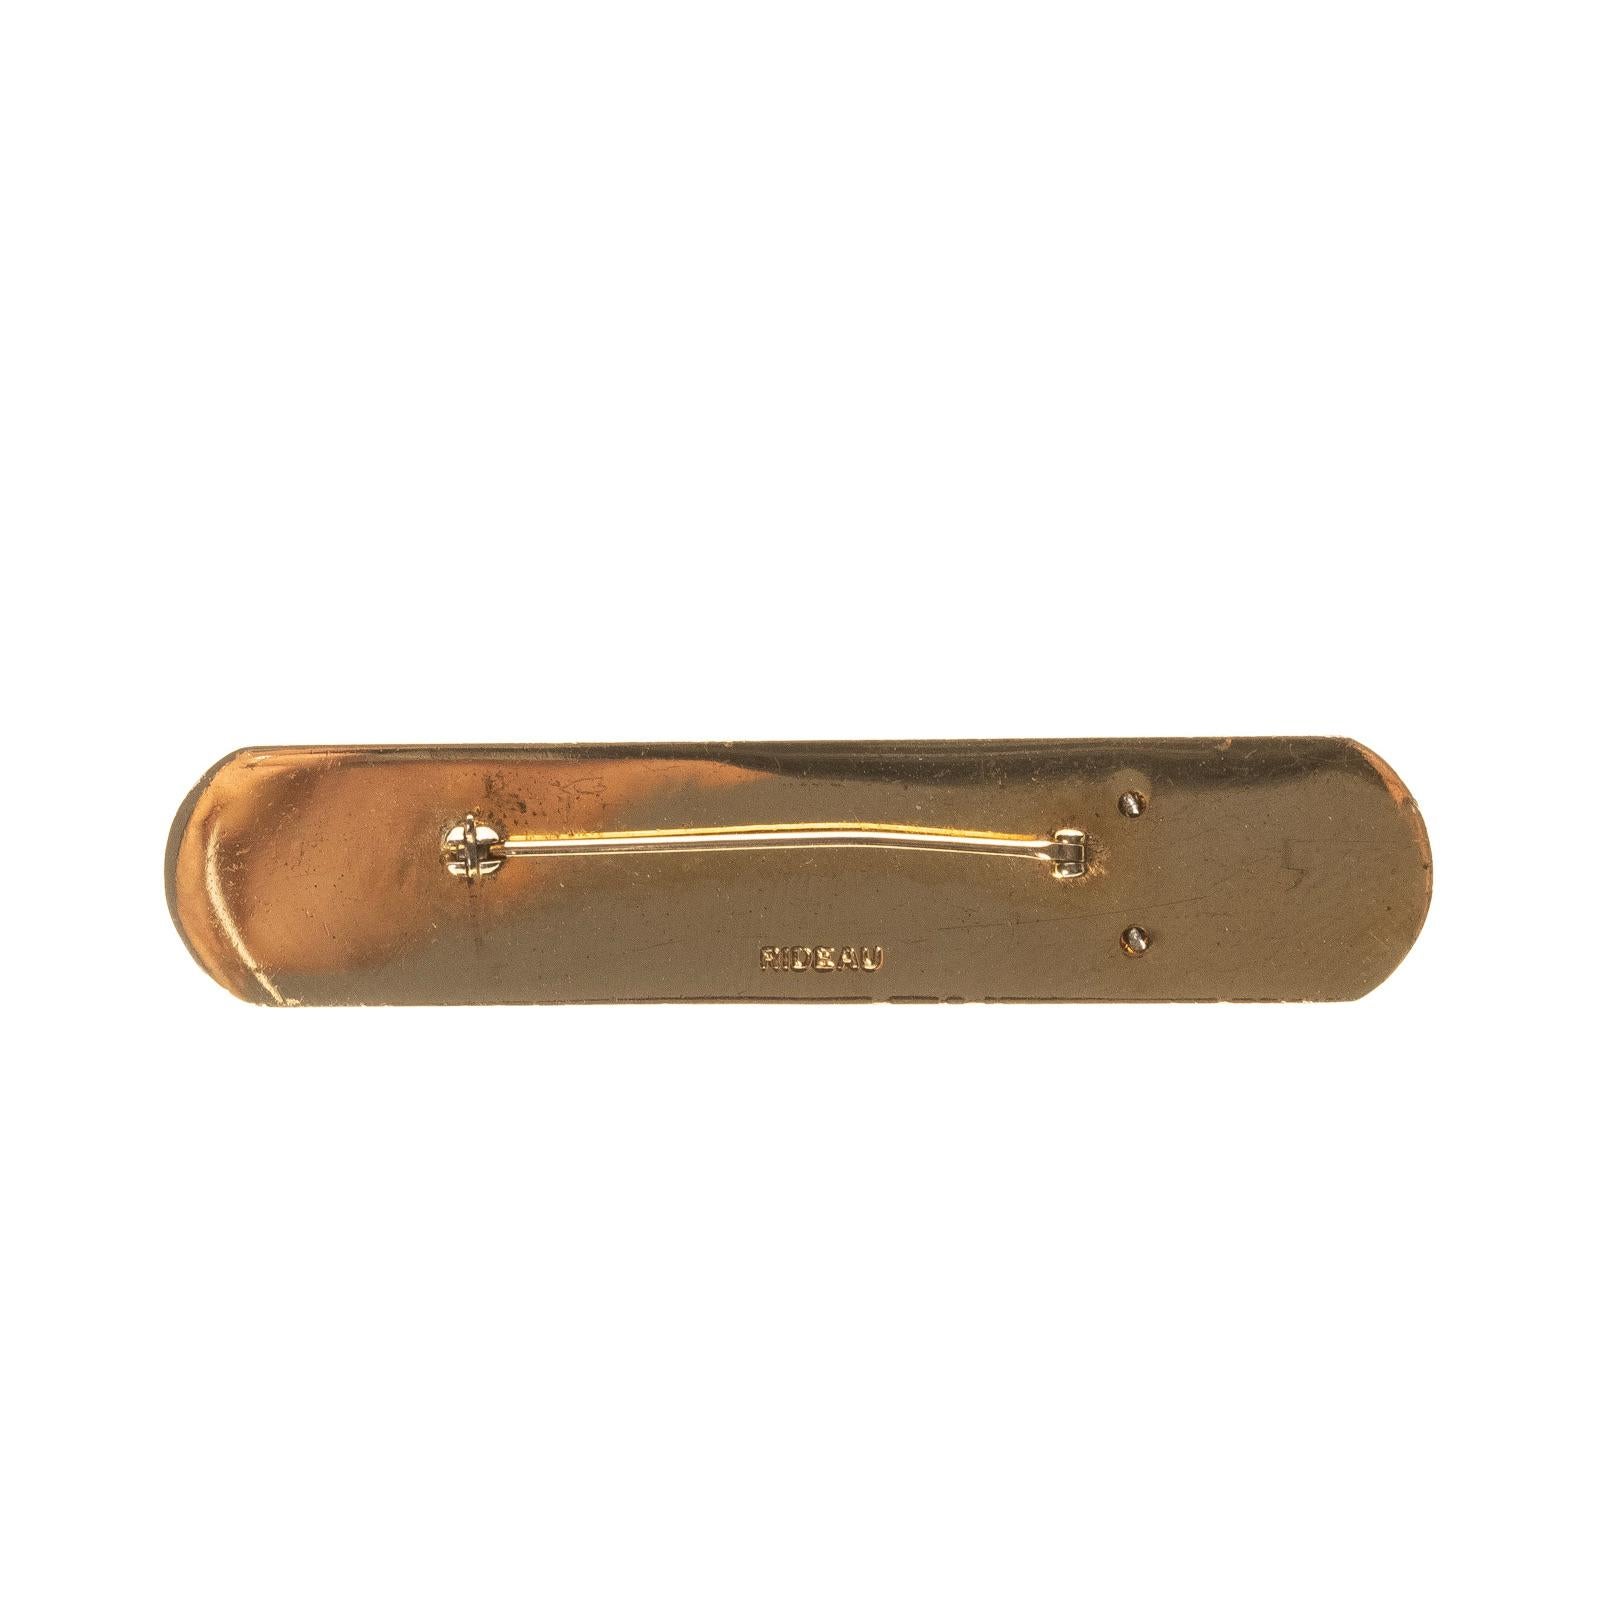 Chanel vintage specialist pin, a staff accessory from the Chanel cosmetics line. Roughly 2.5” long with logo engraved on the front, pin at the back to hold in place. 

COLOR: Gold 
MATERIAL: Metal 
MEASURES: W 2.5” x H 0.5”
COMES WITH: Chanel